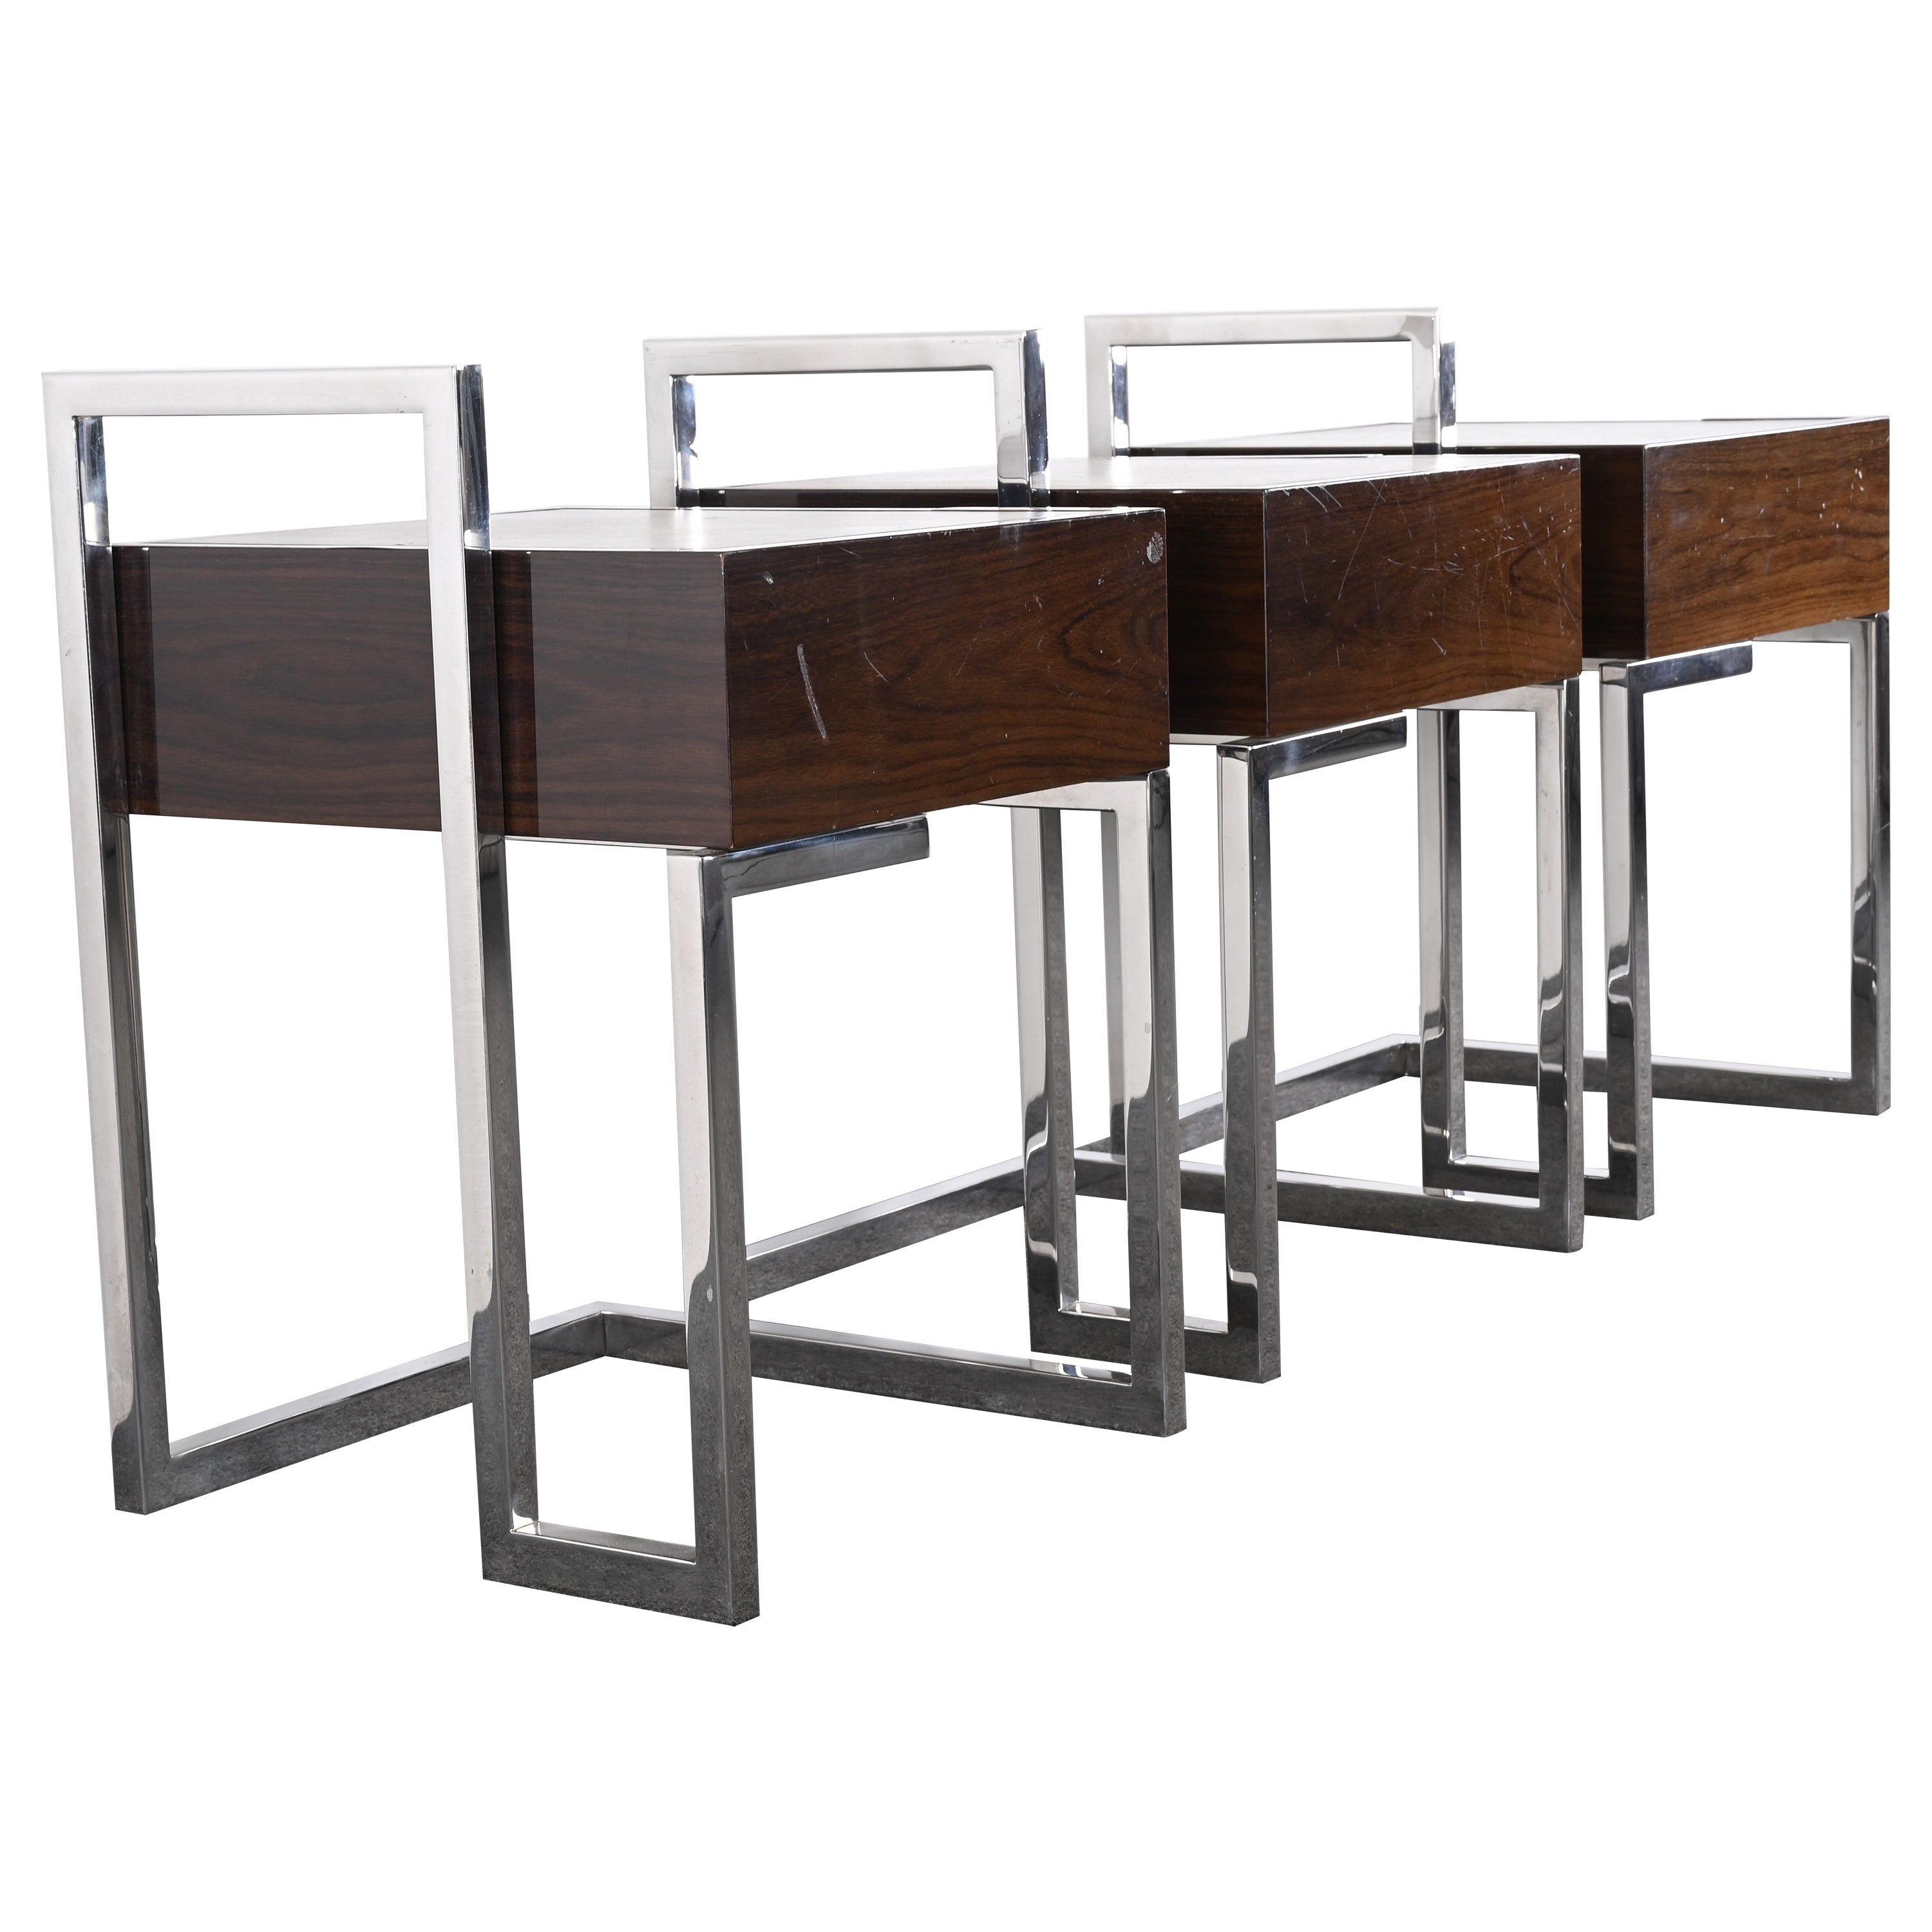 Lacquered Walnut and Stainless Steel End Tables by Vladimir Kagan for Gucci For Sale